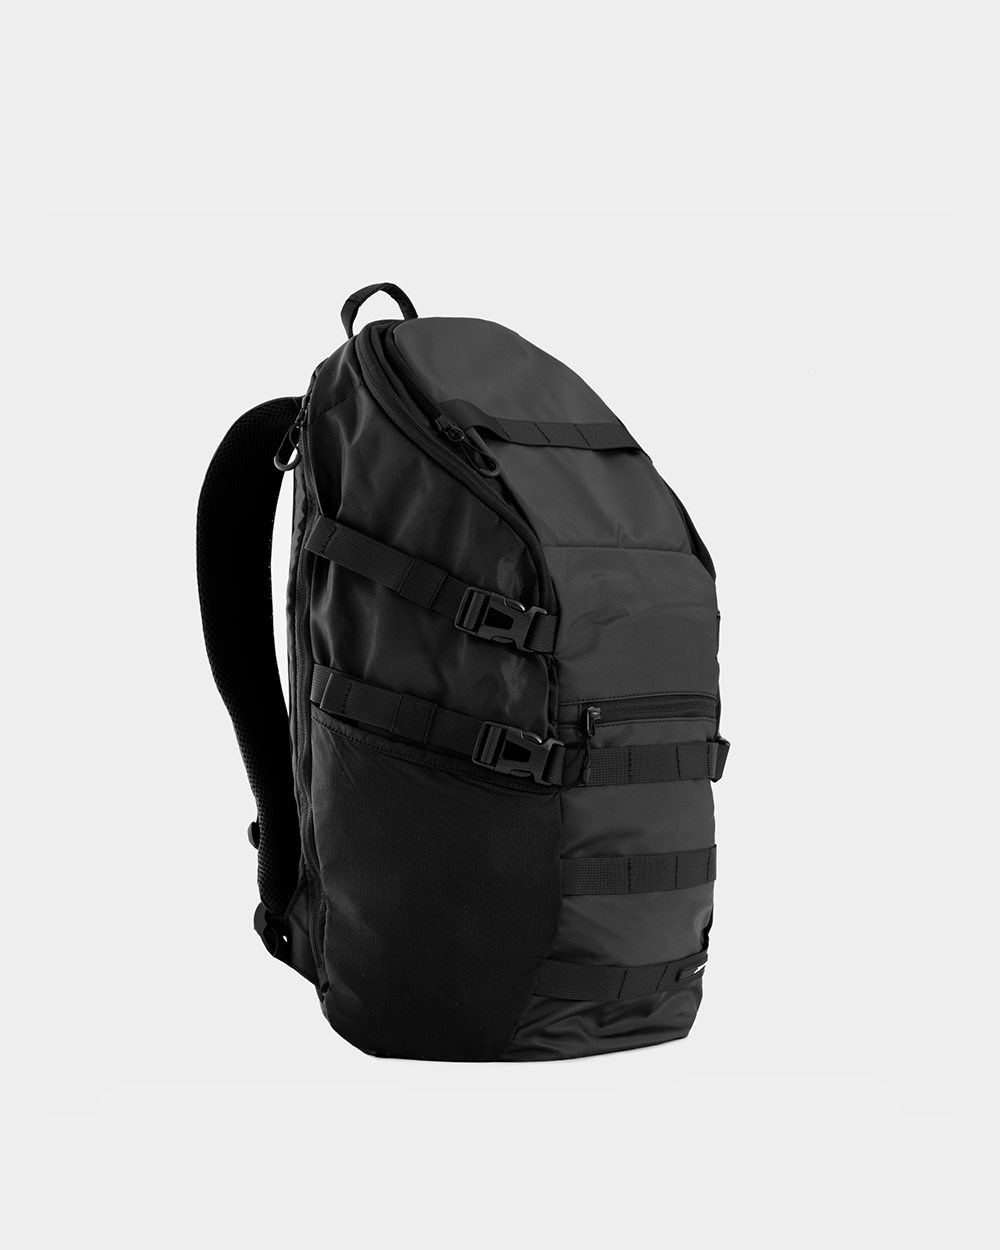 EXPLORE BACKPACK | STORROR | parkour clothing & technical sportswear